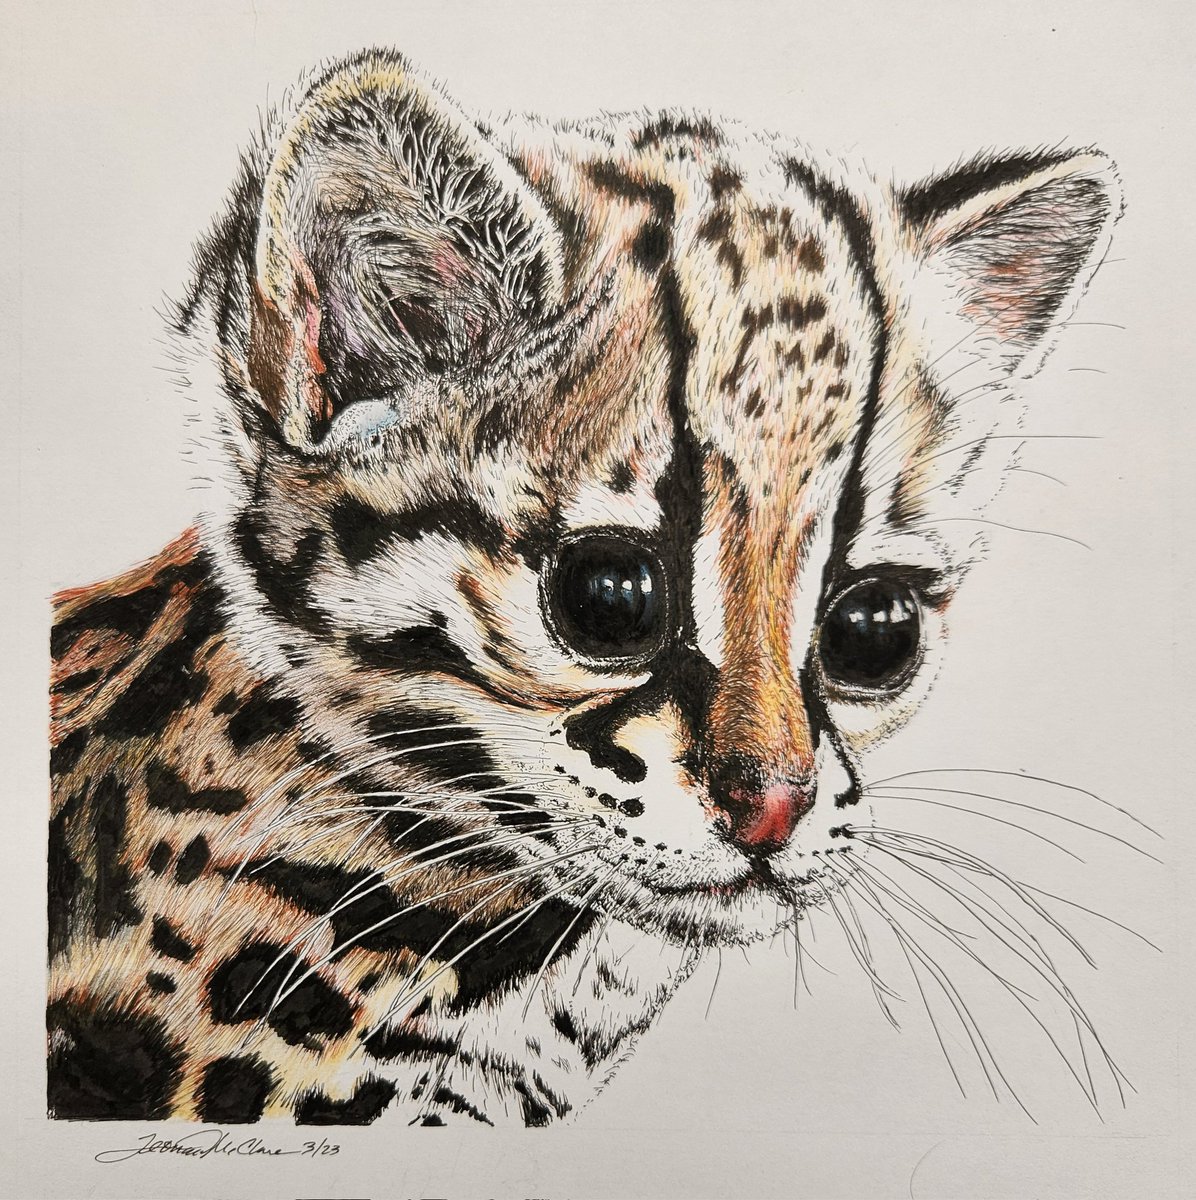 My first of 2023. OK, it's another cat. Young Margay. I couldn't resist. Various sized Micron pens - black, dark brown and brown. An assortment of Prismacolor pencils for embellishment. Image is 7.5 x 7.5.